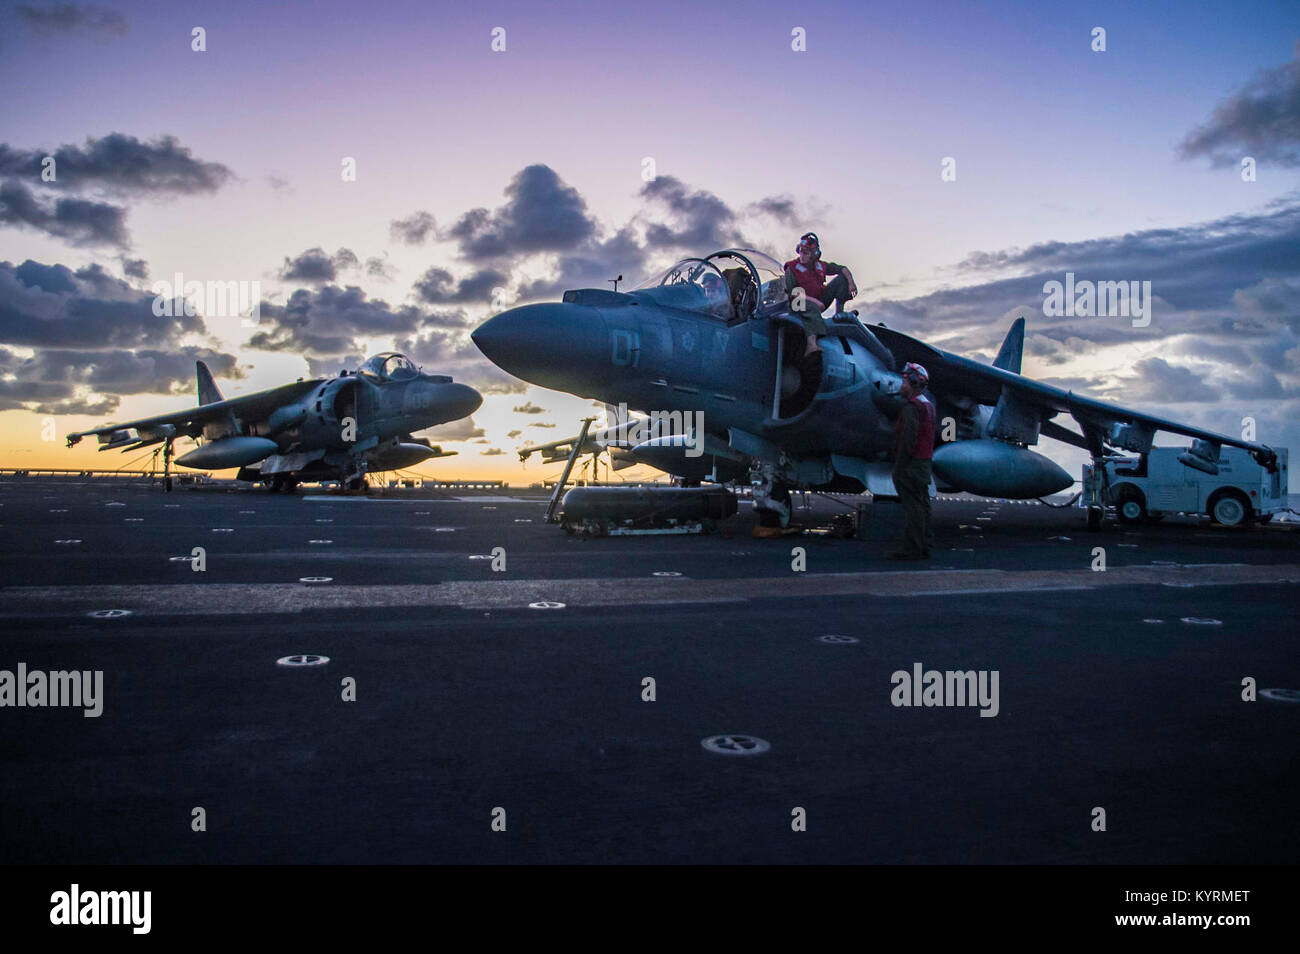 CORAL SEA (Aug. 3, 2017) Cpl. Noah During (cockpit), from Stratsburg, Pa., Cpl. Kirby Plummer (center), from Poland, Maine, and Lance Cpl. Jerry Chambers, from Greensborough, Ala., analyze computer logs of an AV-8B Harrier, assigned to the “Tomcats” of Marine Attack Squadron (VMA) 311, on the flight deck of the amphibious assault ship USS Bonhomme Richard (LHD 6). Bonhomme Richard, flagship of the Bonhomme Richard Expeditionary Strike Group (ESG), is operating in the Indo-Asia-Pacific region to enhance partnerships and be a ready-response force for any type of contingency. (U.S. Navy Stock Photo